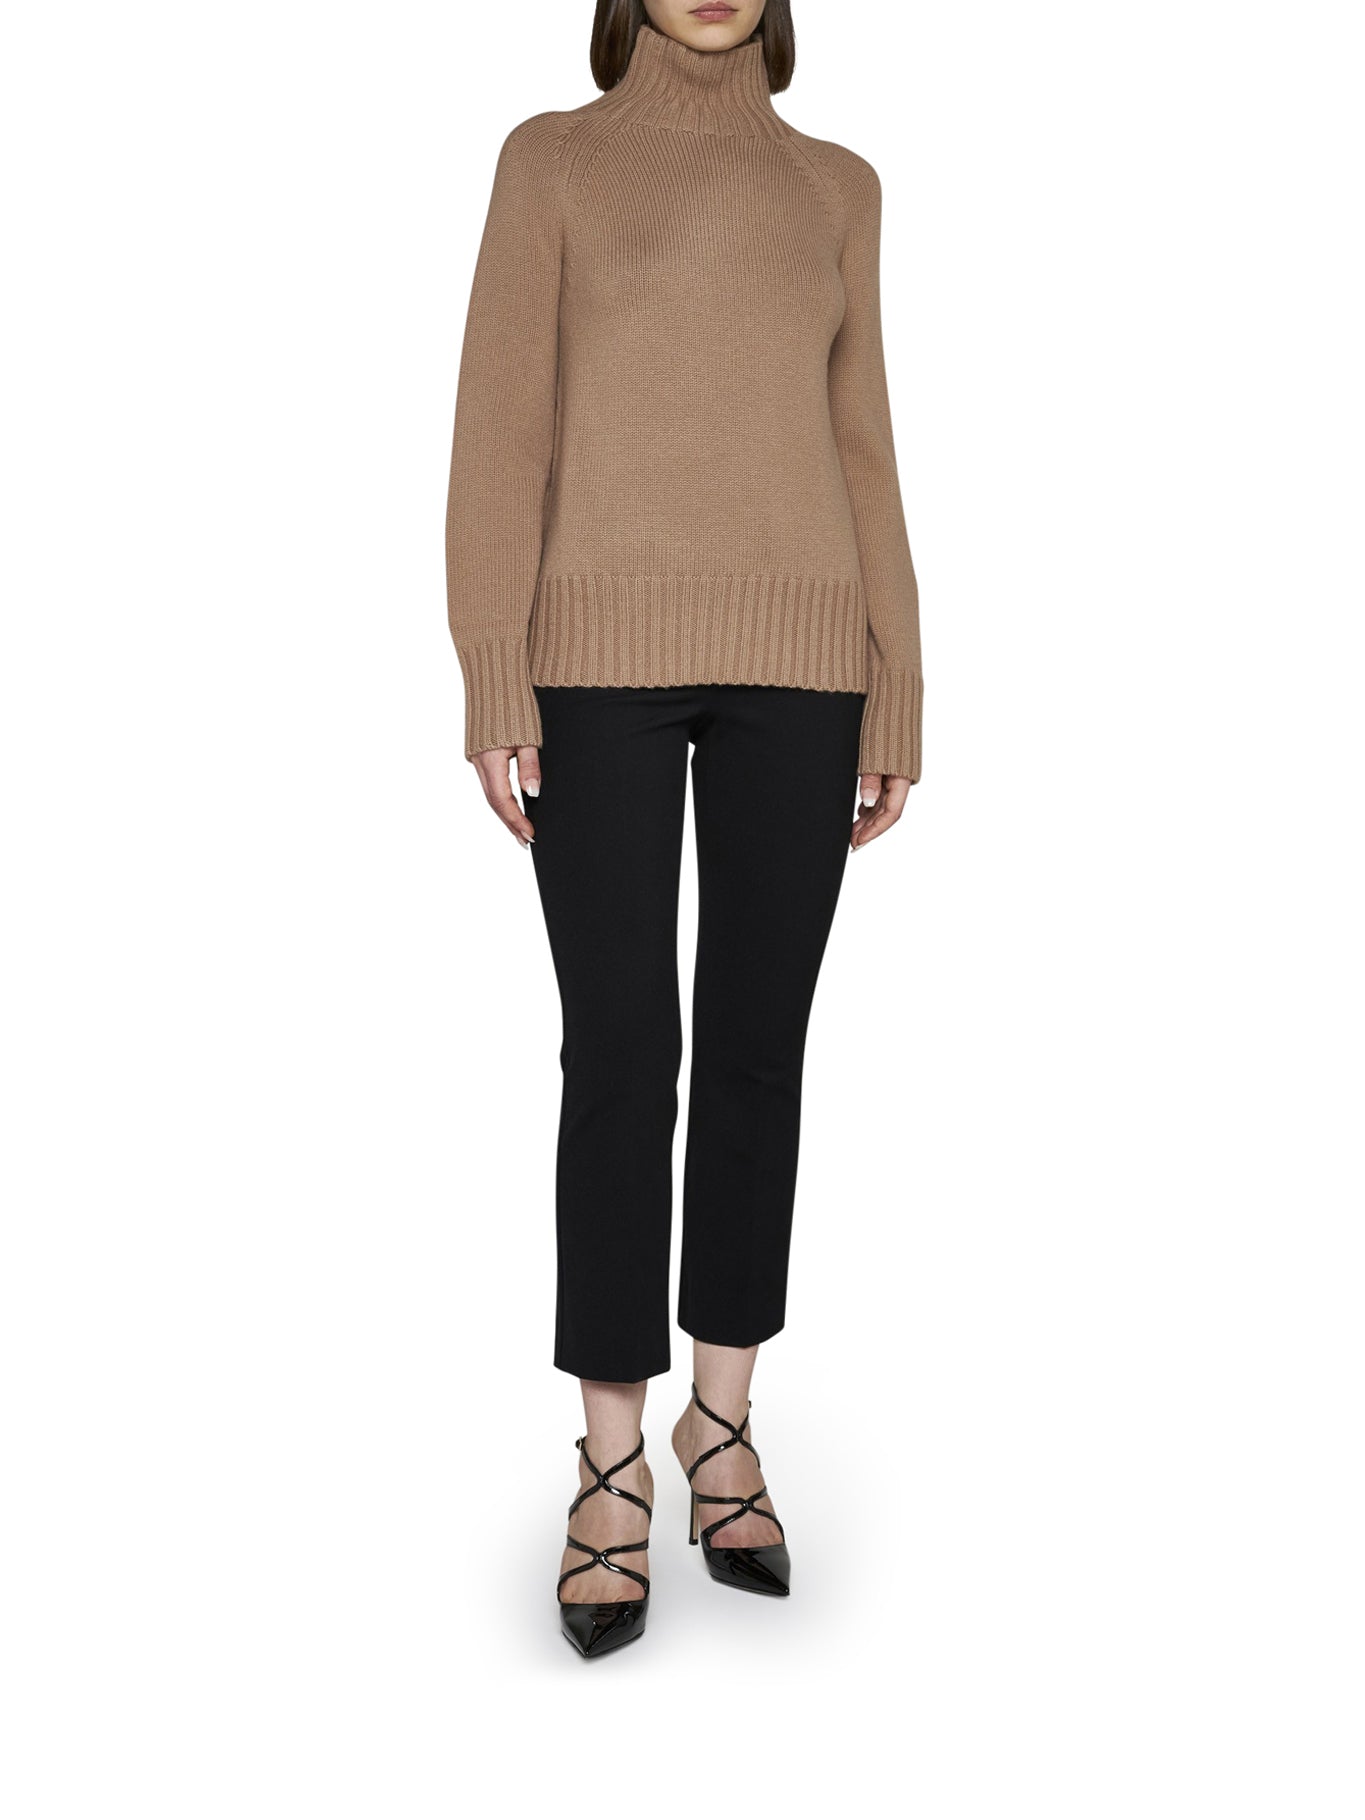 Mantova S Max Mara pullover in wool and cashmere